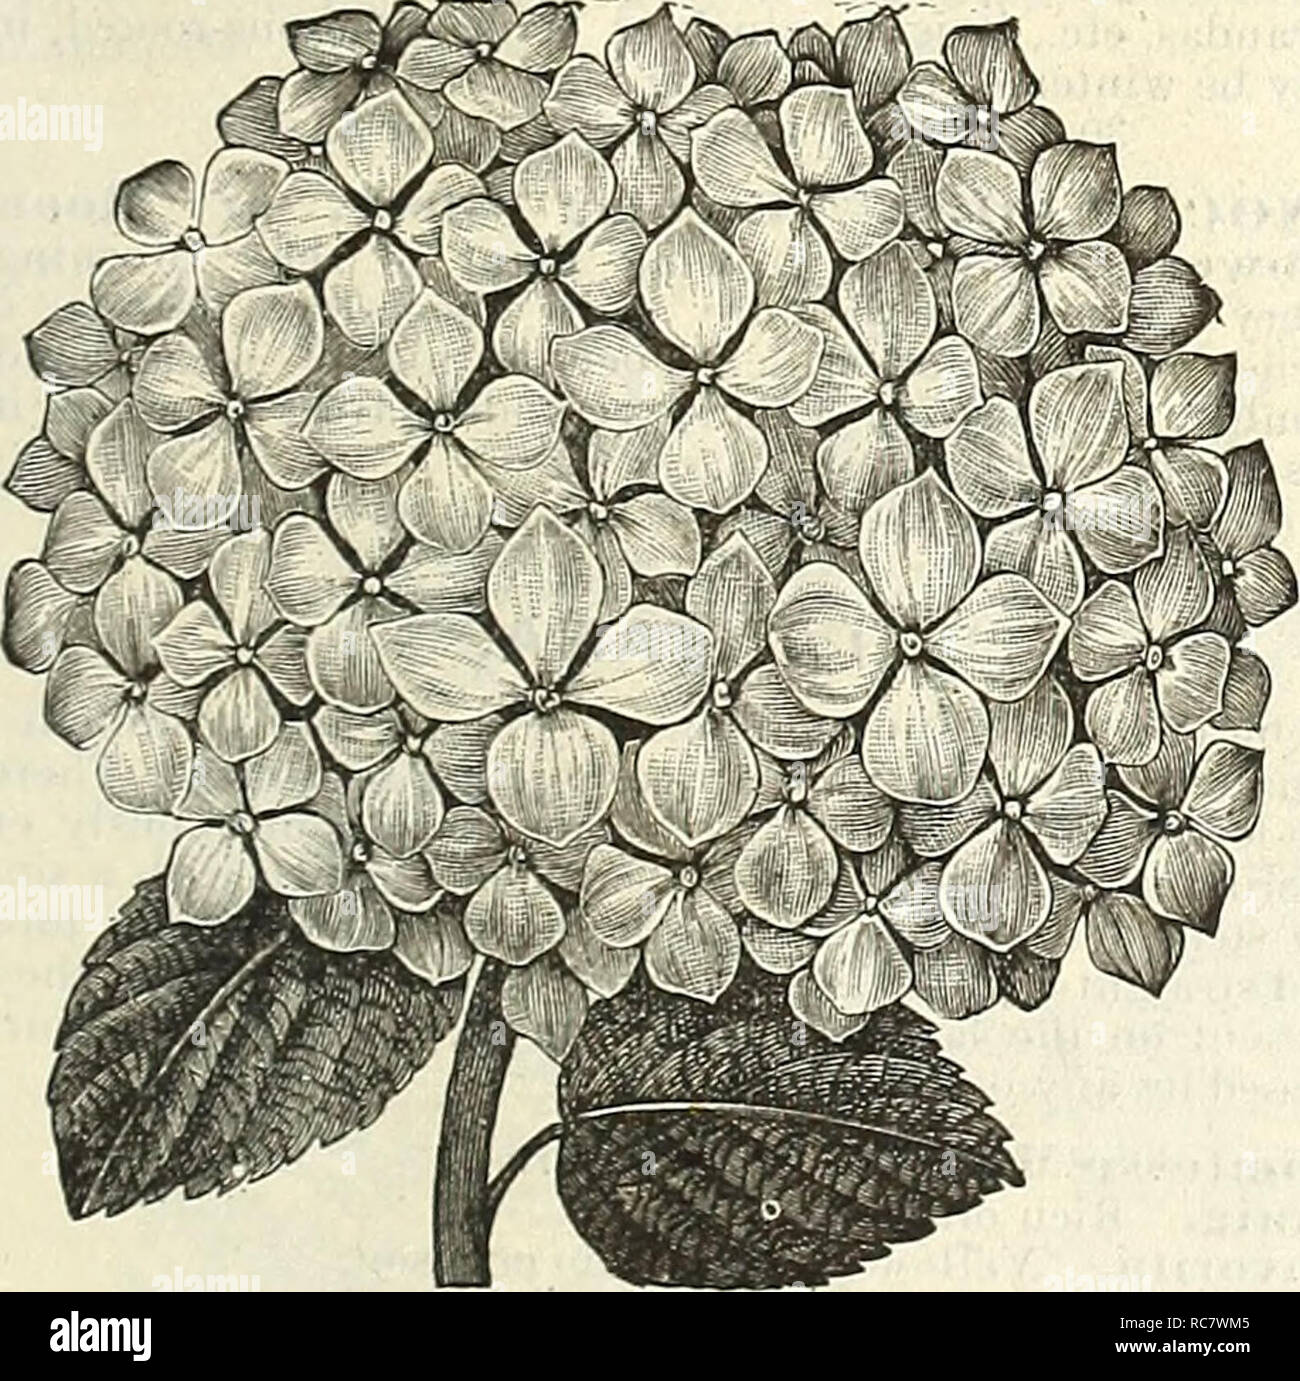 . Dreer's garden calendar for 1888. Seeds Catalogs; Nursery stock Catalogs; Gardening Catalogs; Flowers Seeds Catalogs. HYDRANGEA S Continued. I'aniculata Grandiflora. See Shrubs. Rhamnus Pictus. A grand variety, producing im- Heliotkope—Queen of the Violets. HELIOTROPE. Chieftain. Lilac, large truss. r Grandiflorum. Pale lilac. Mad. de Bloiiay. Large truss, nearly pure white. Mrs. D. Woods. Deep violet-purple; very free, and desirable sort; trusses large ; the flowers are slightly double. Queen of the Violets. Of the deepest violet purple, with large, almost pure white eye, and very fragrant Stock Photo